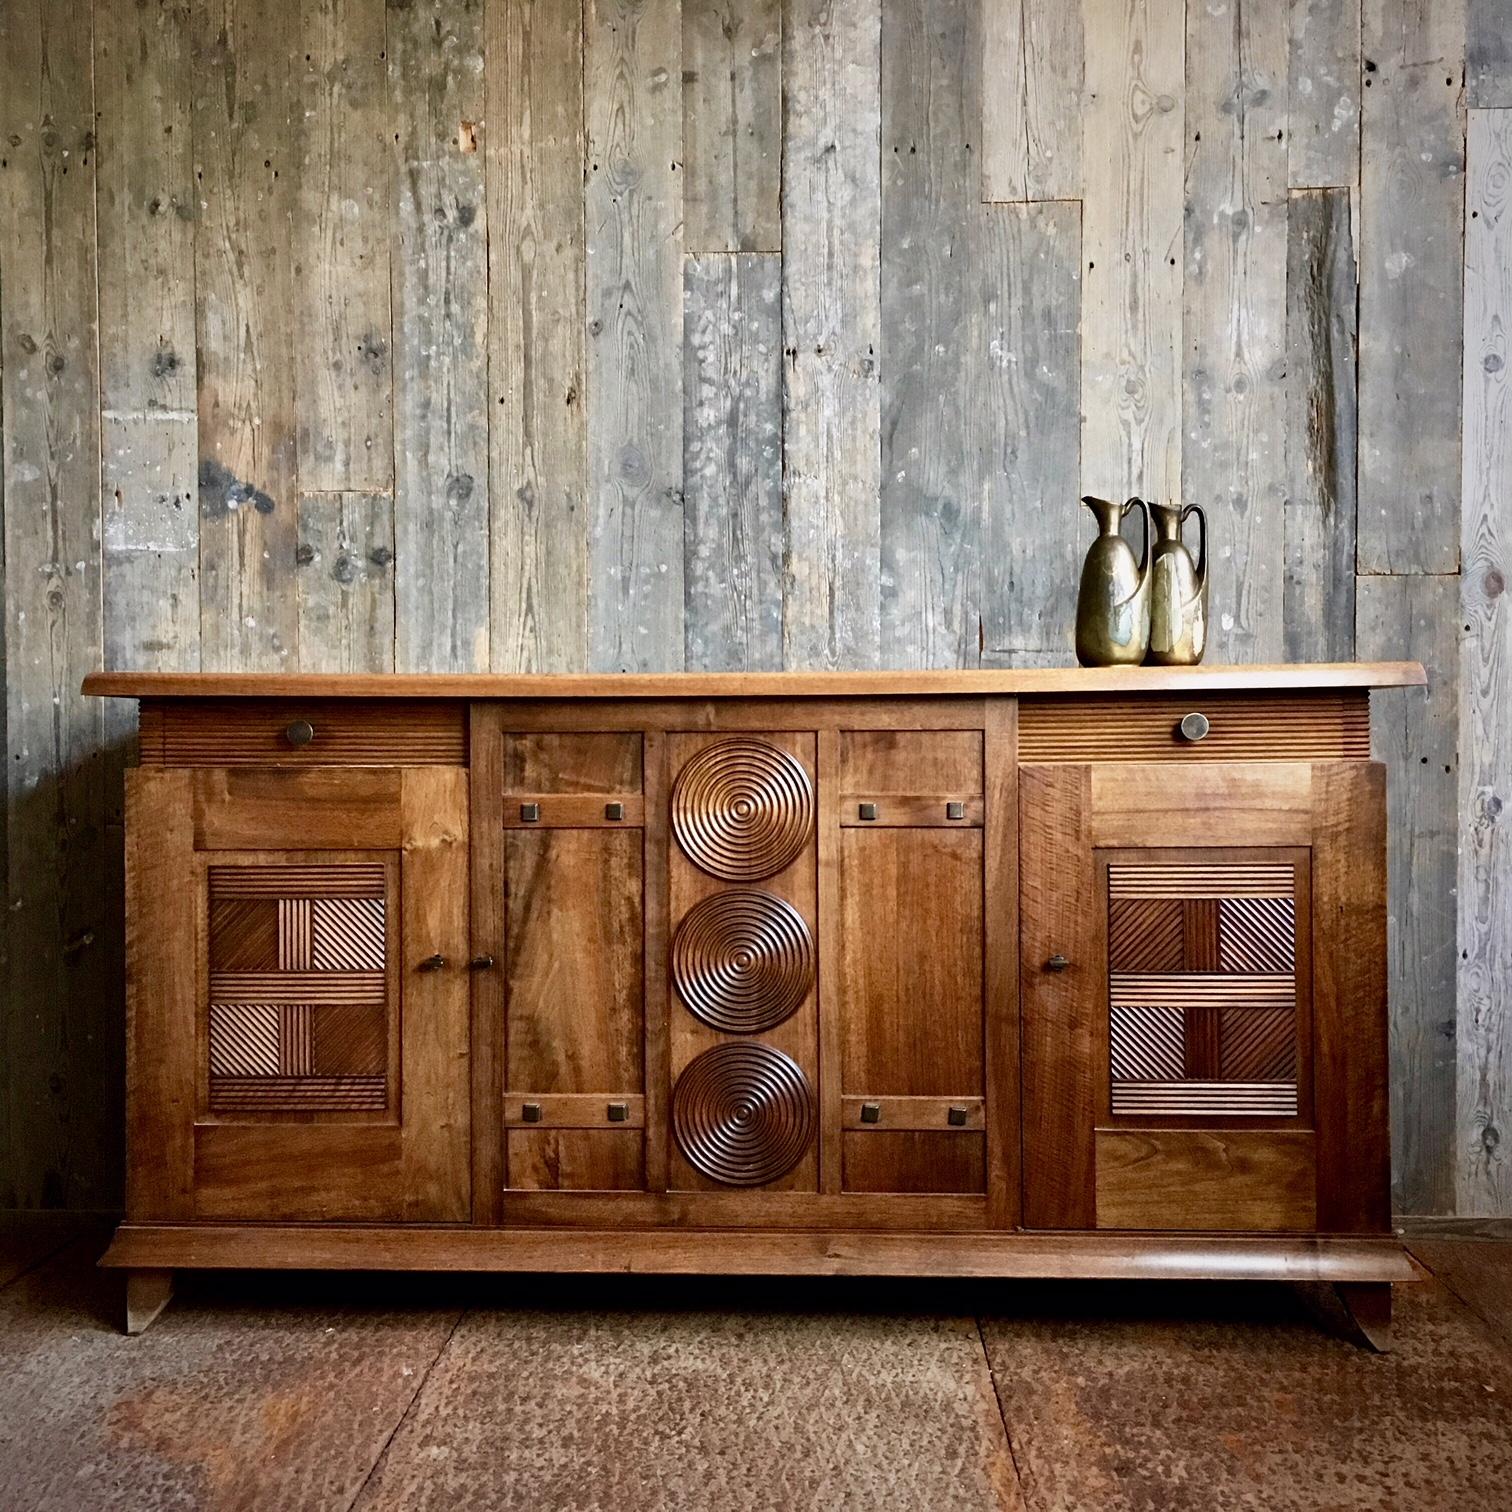 Beautiful walnut sideboard by the French designer Charles Dudouyt. The cabinet was made in the 30s and is a fine example of a progressive, clean and modern style, but influenced by Art Deco and the Arts and Crafts movement. 

The cabinet has three